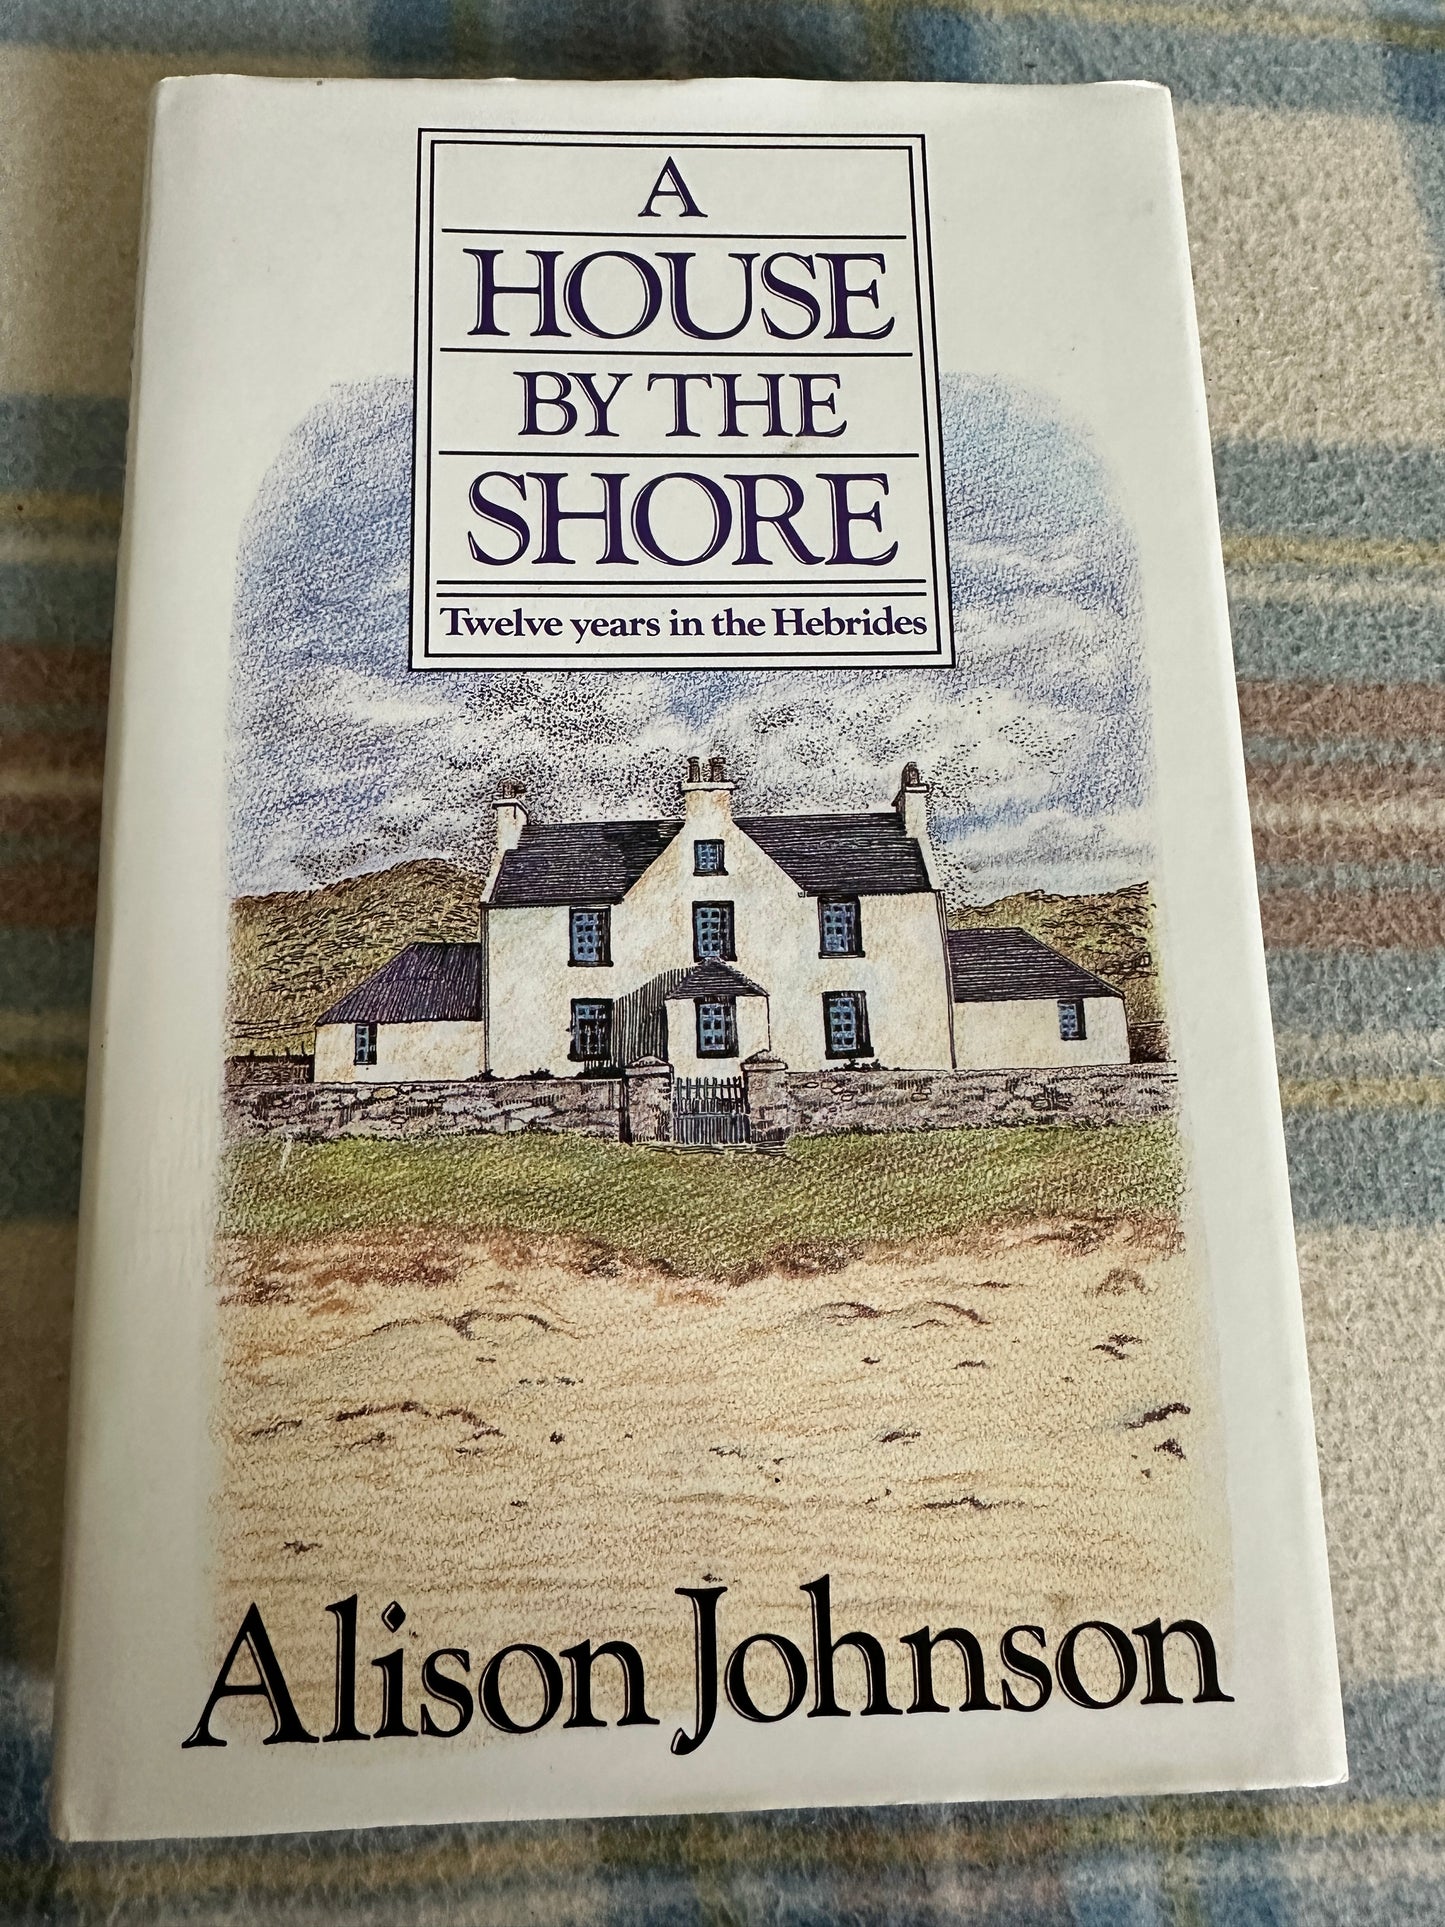 1987*Signed* A House By The Shore - Alison Johnson(Victor Gollancz)